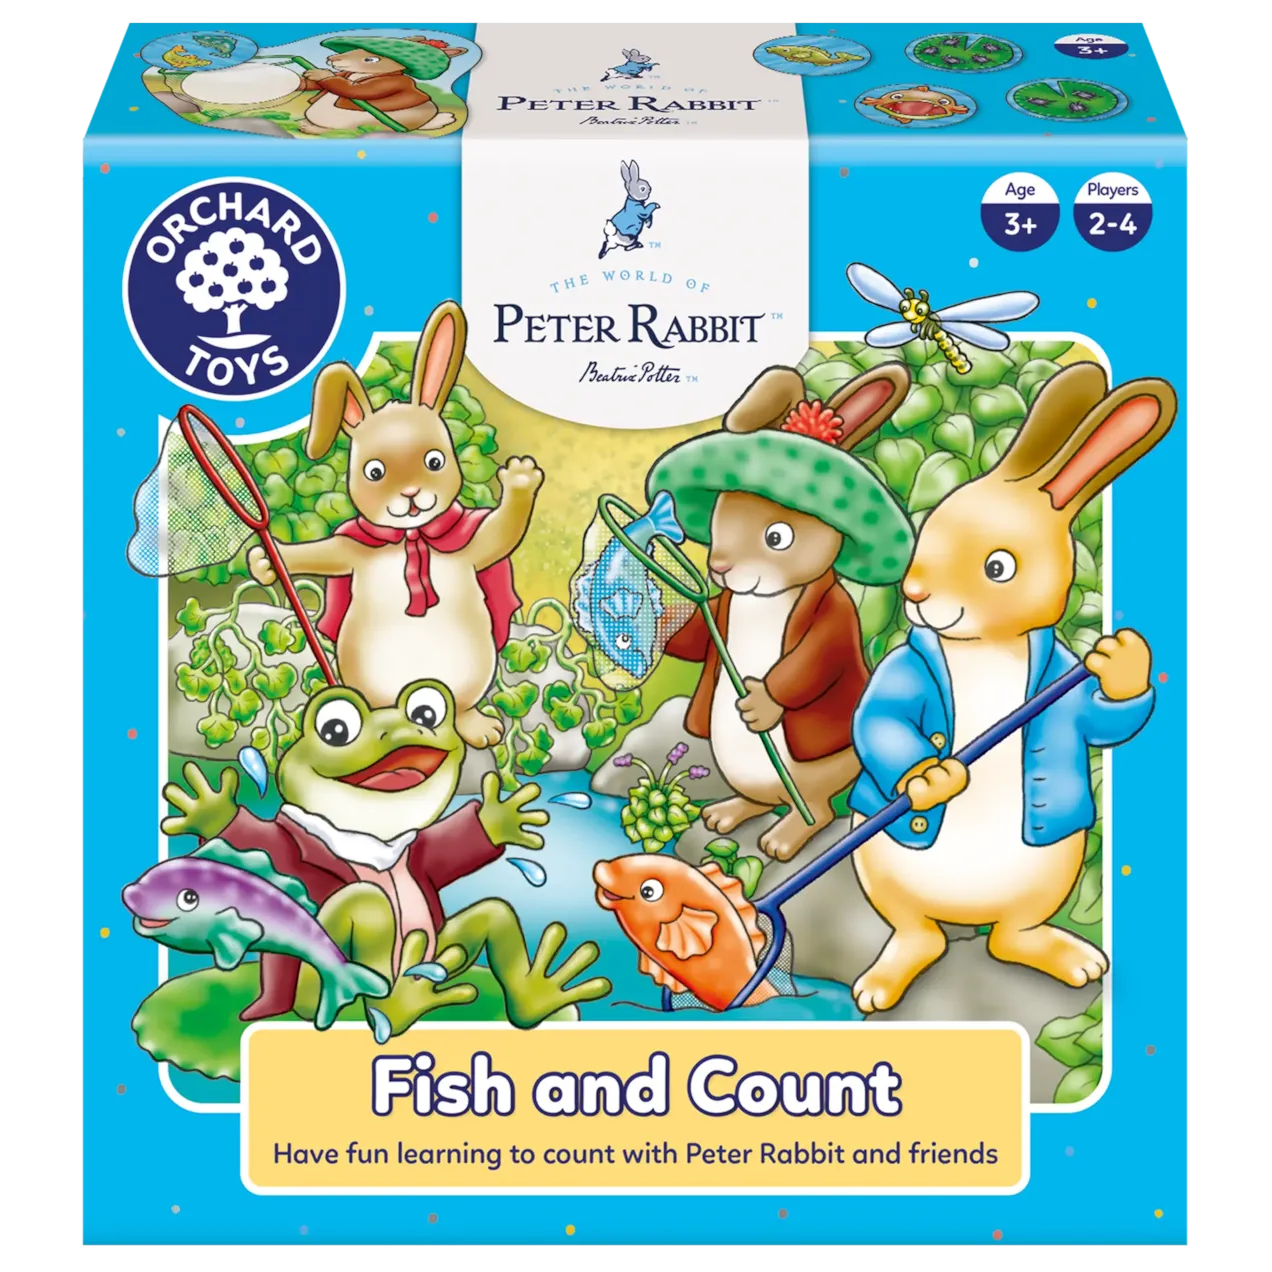 Orchard Toys Peter Rabbit Fish and Count